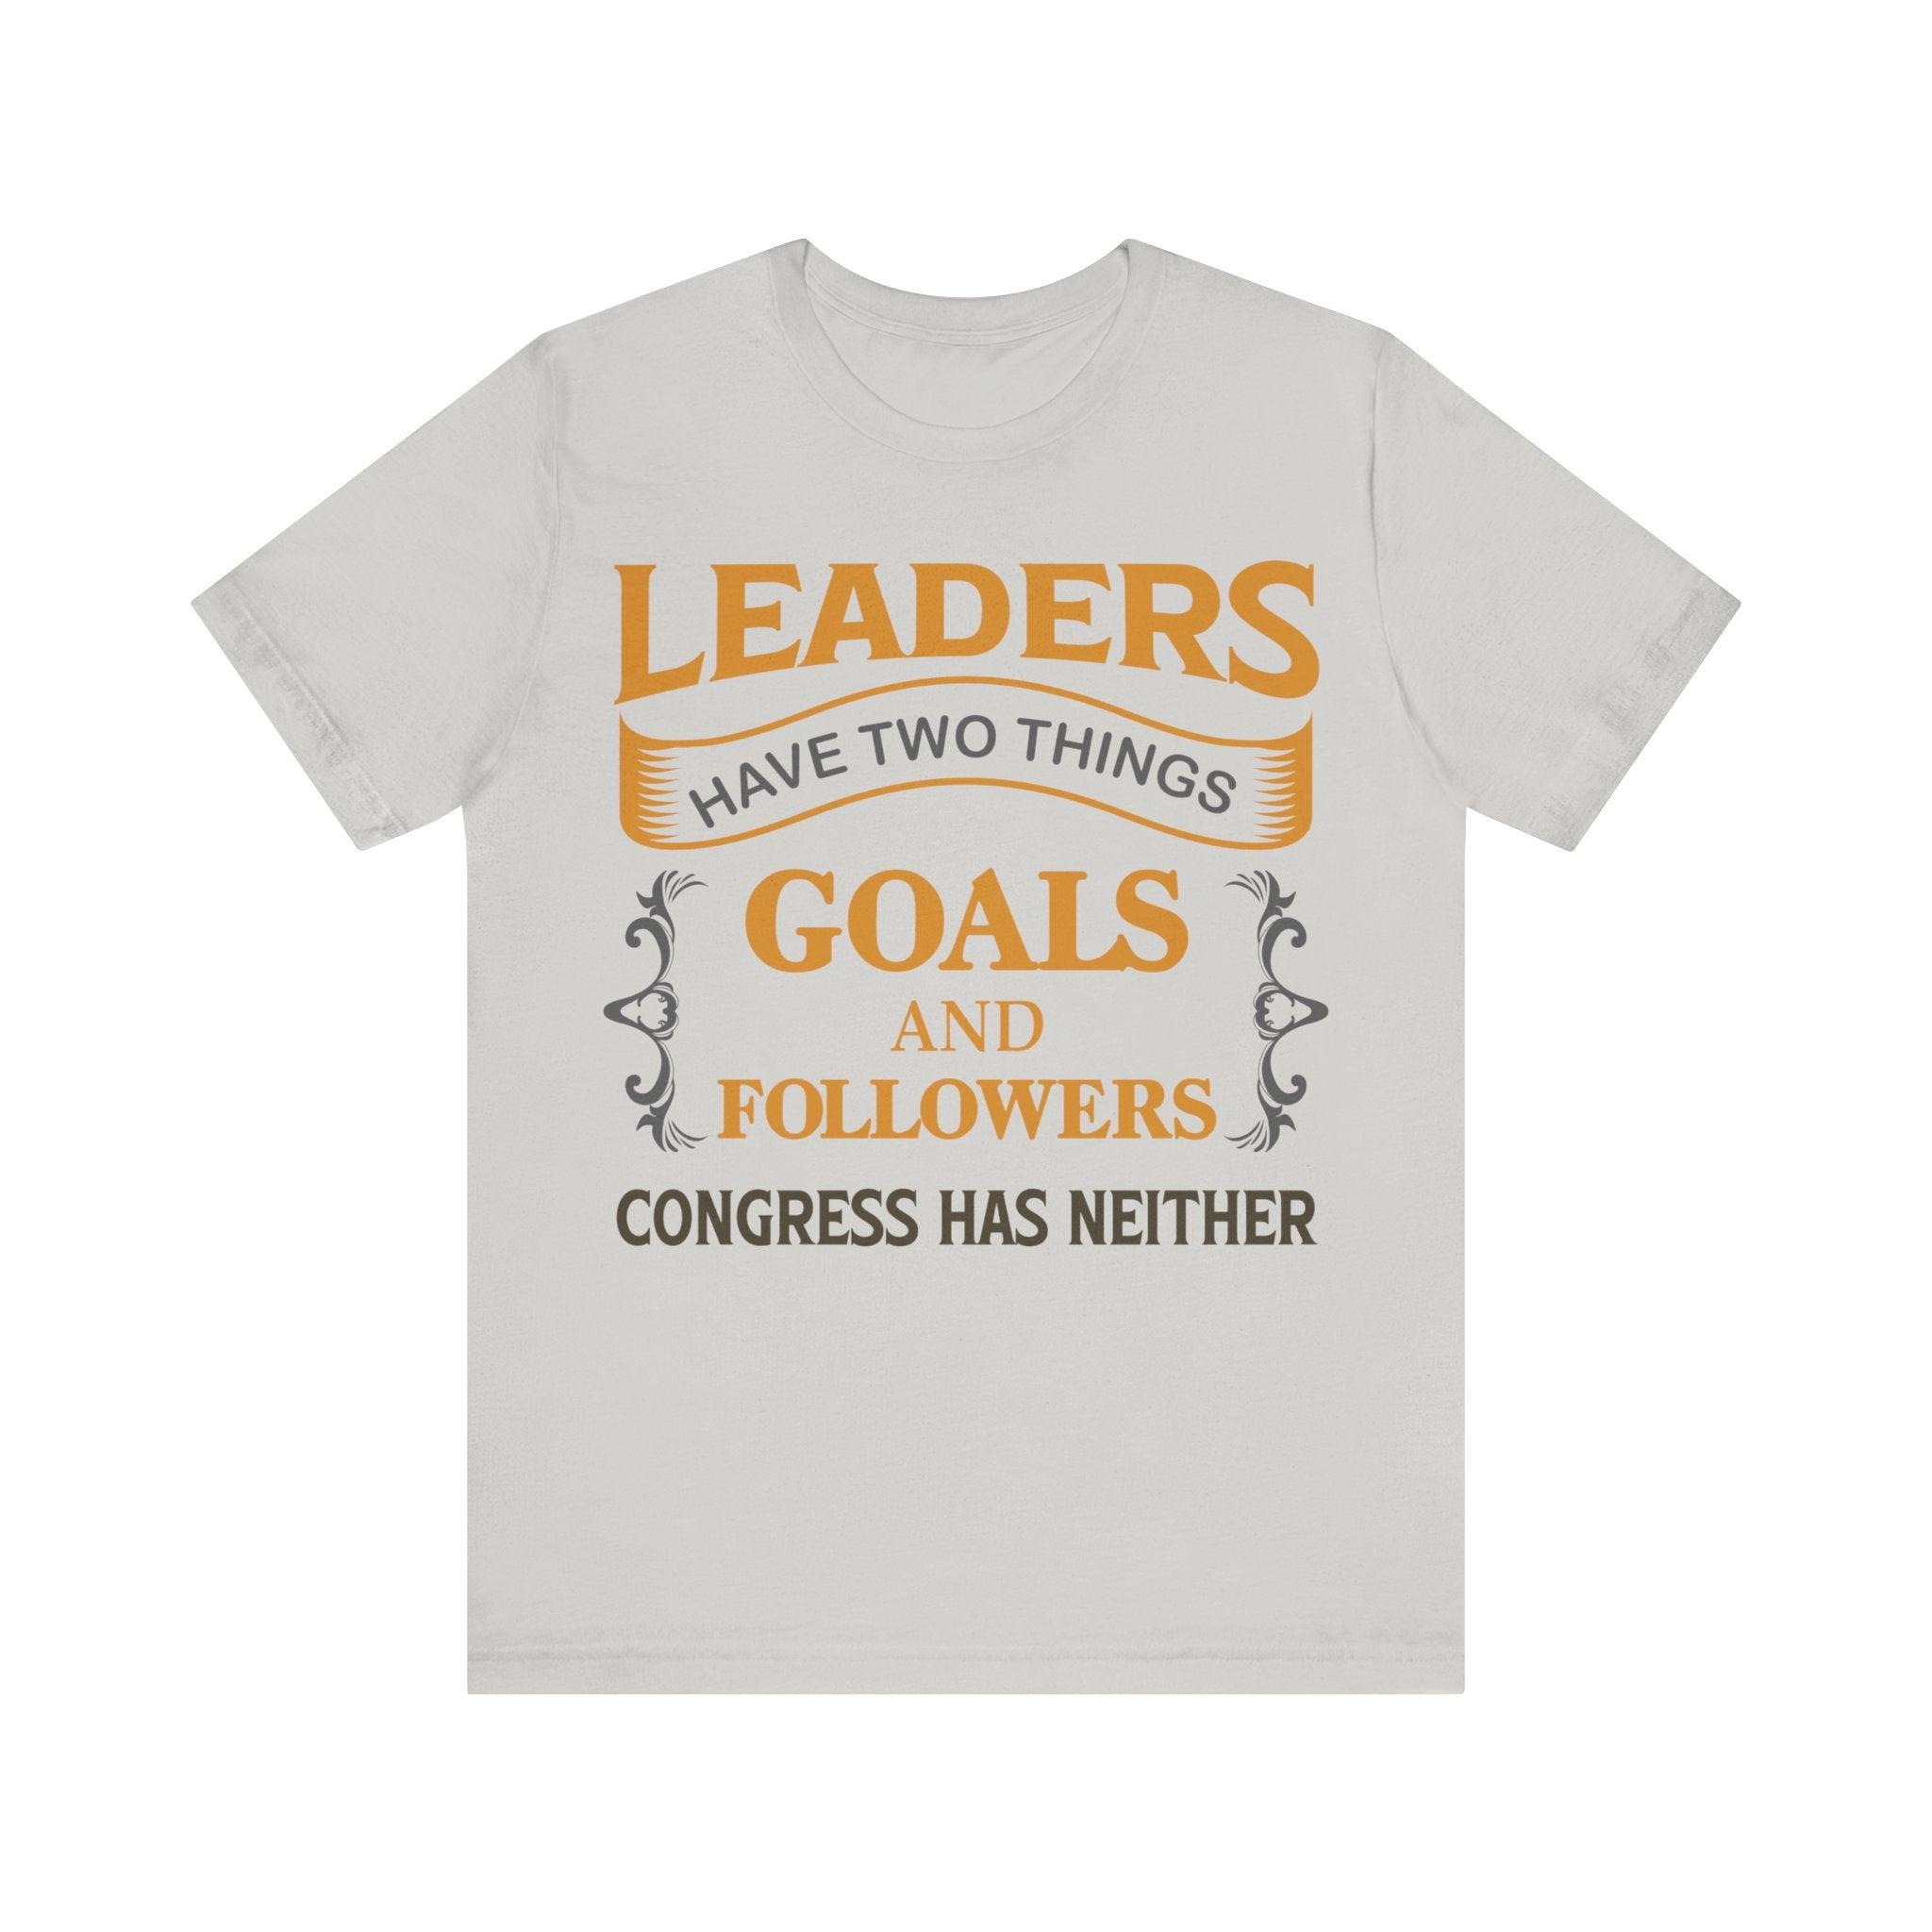 Leaders Two Things - Goals and Followers